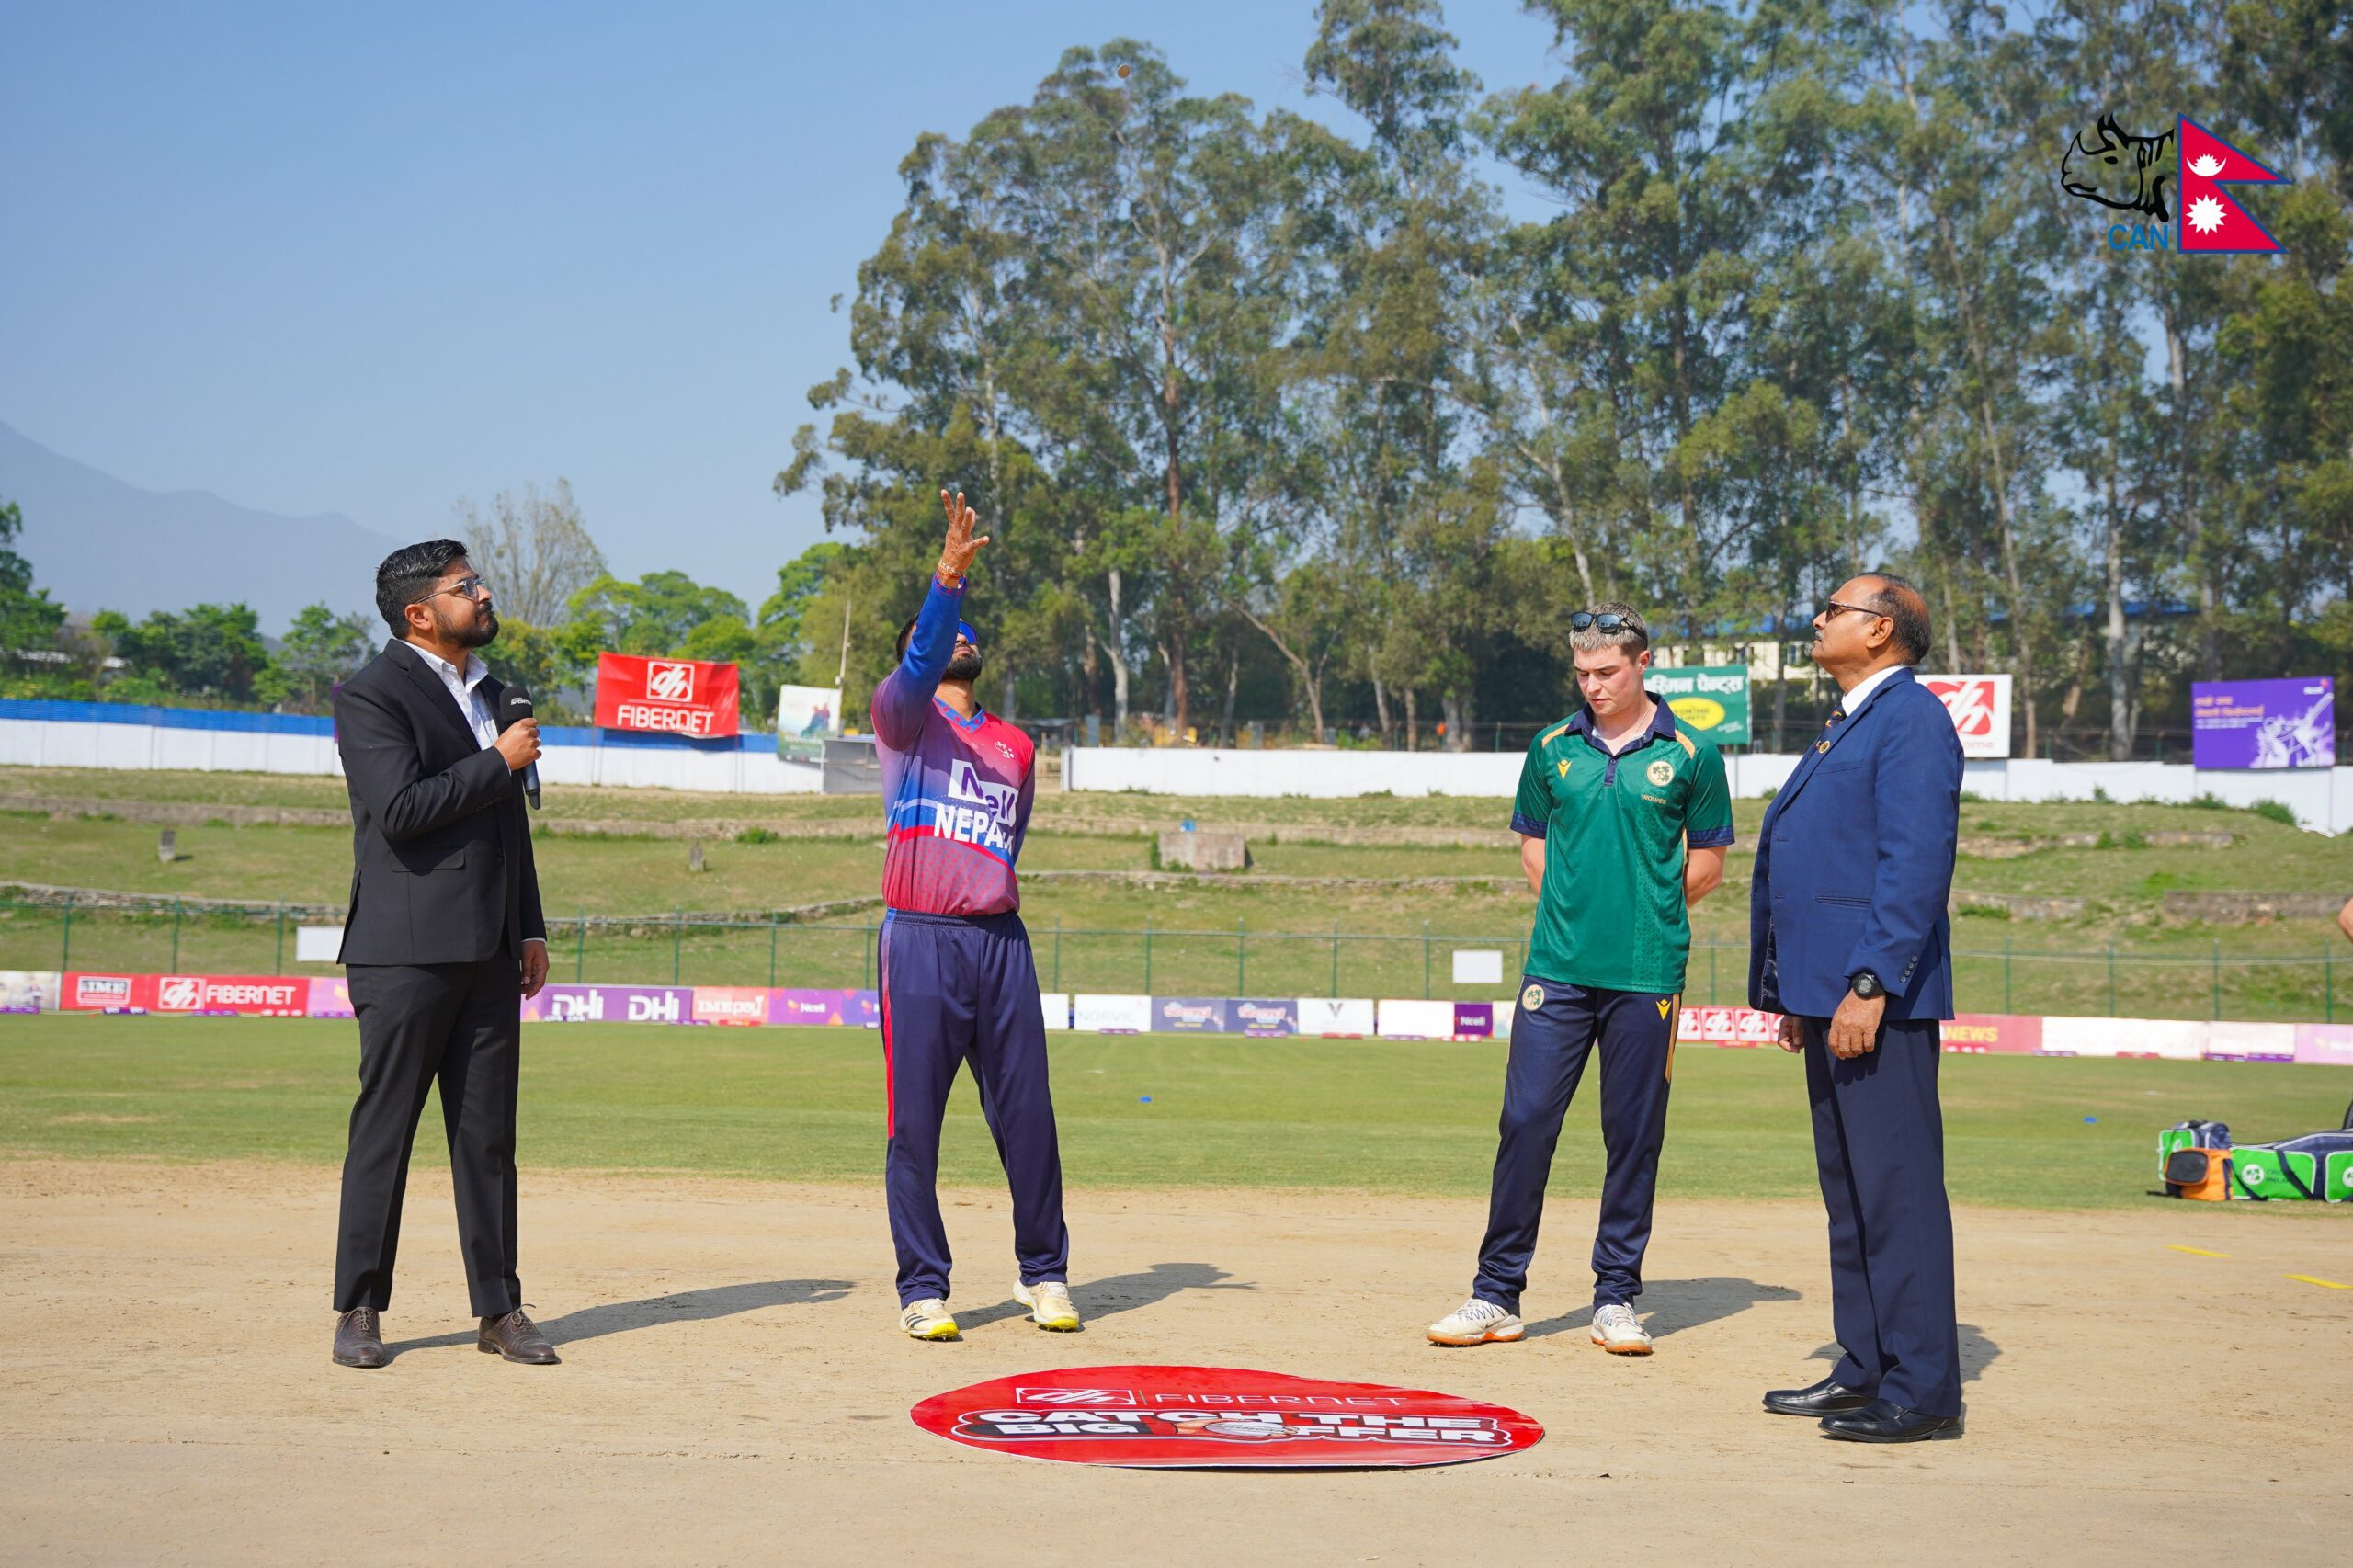 Ireland Wolves won the toss, batting first against Nepal ‘A’